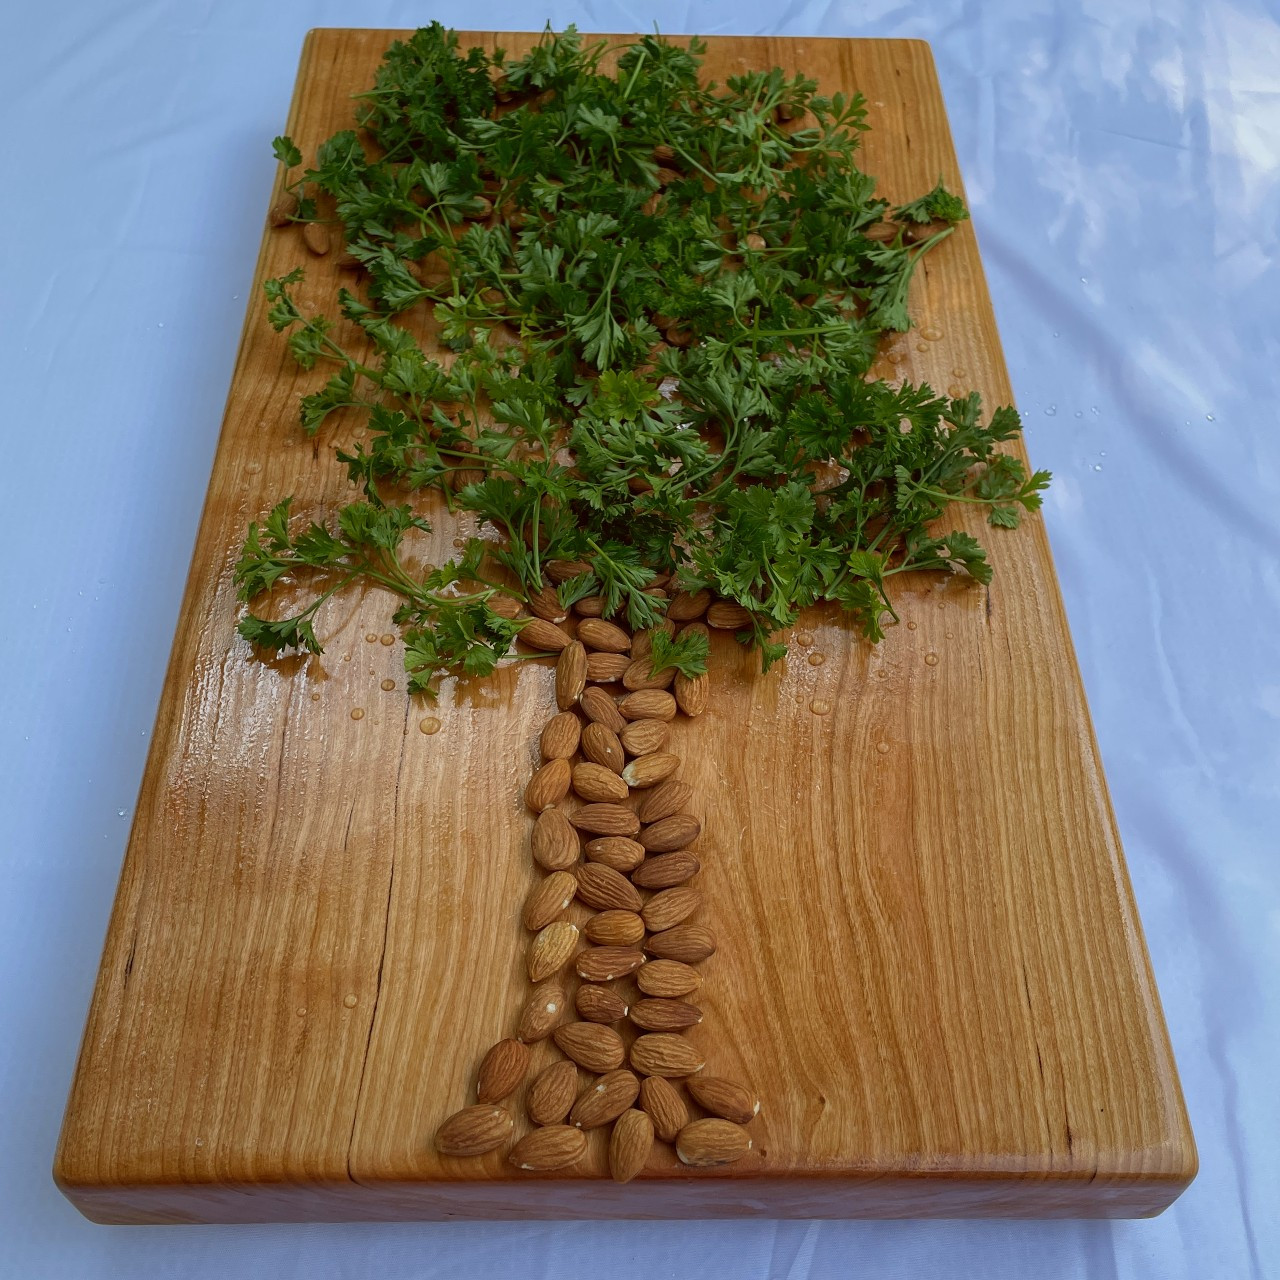 https://cdn11.bigcommerce.com/s-1vey7r6116/images/stencil/1280x1280/products/136/515/cherry-serving-board-cutting-with-tree-made-of-almonds-and-parsley__40160.1693096834.jpg?c=1